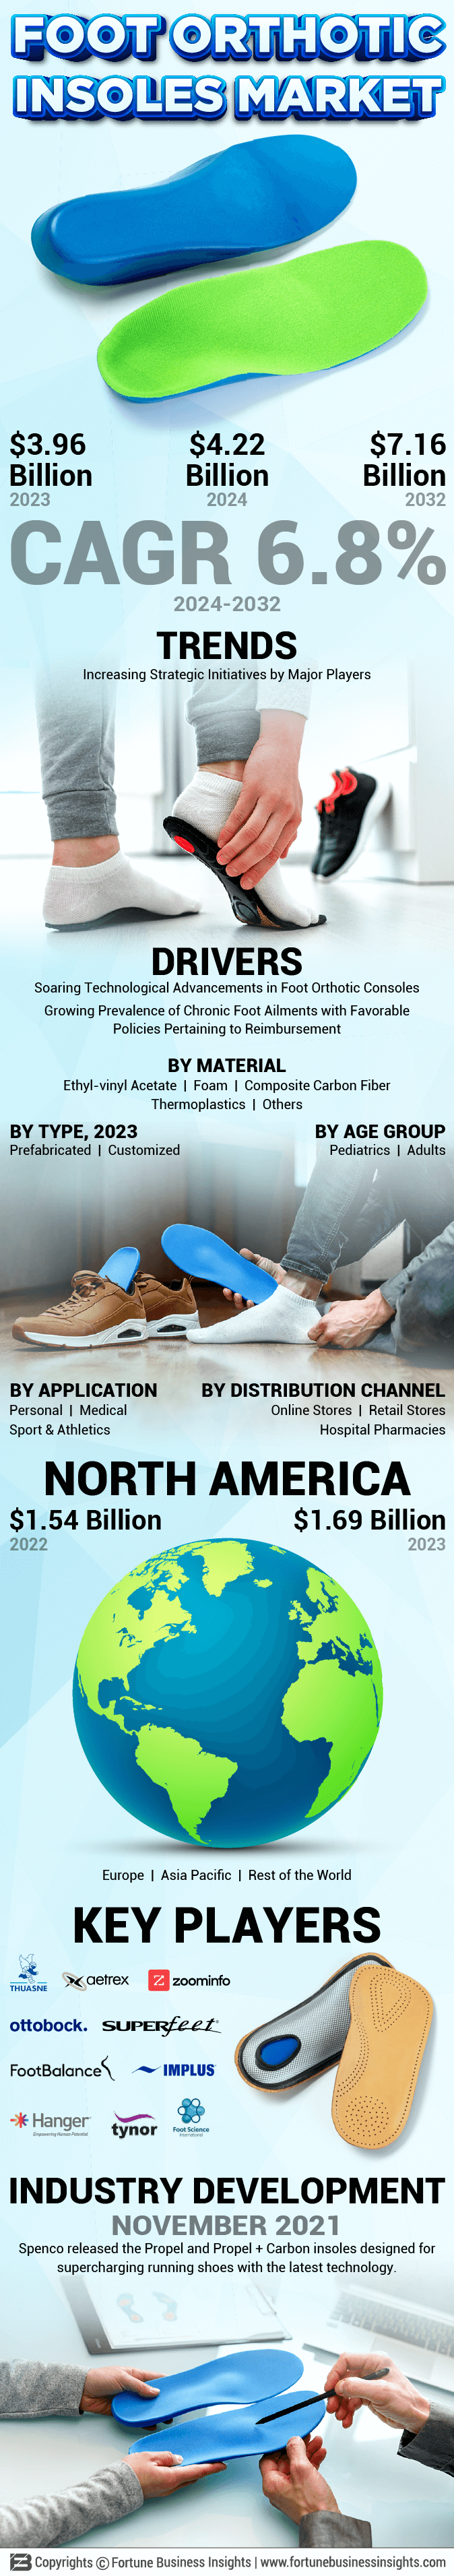 Foot Orthotic Insoles Market